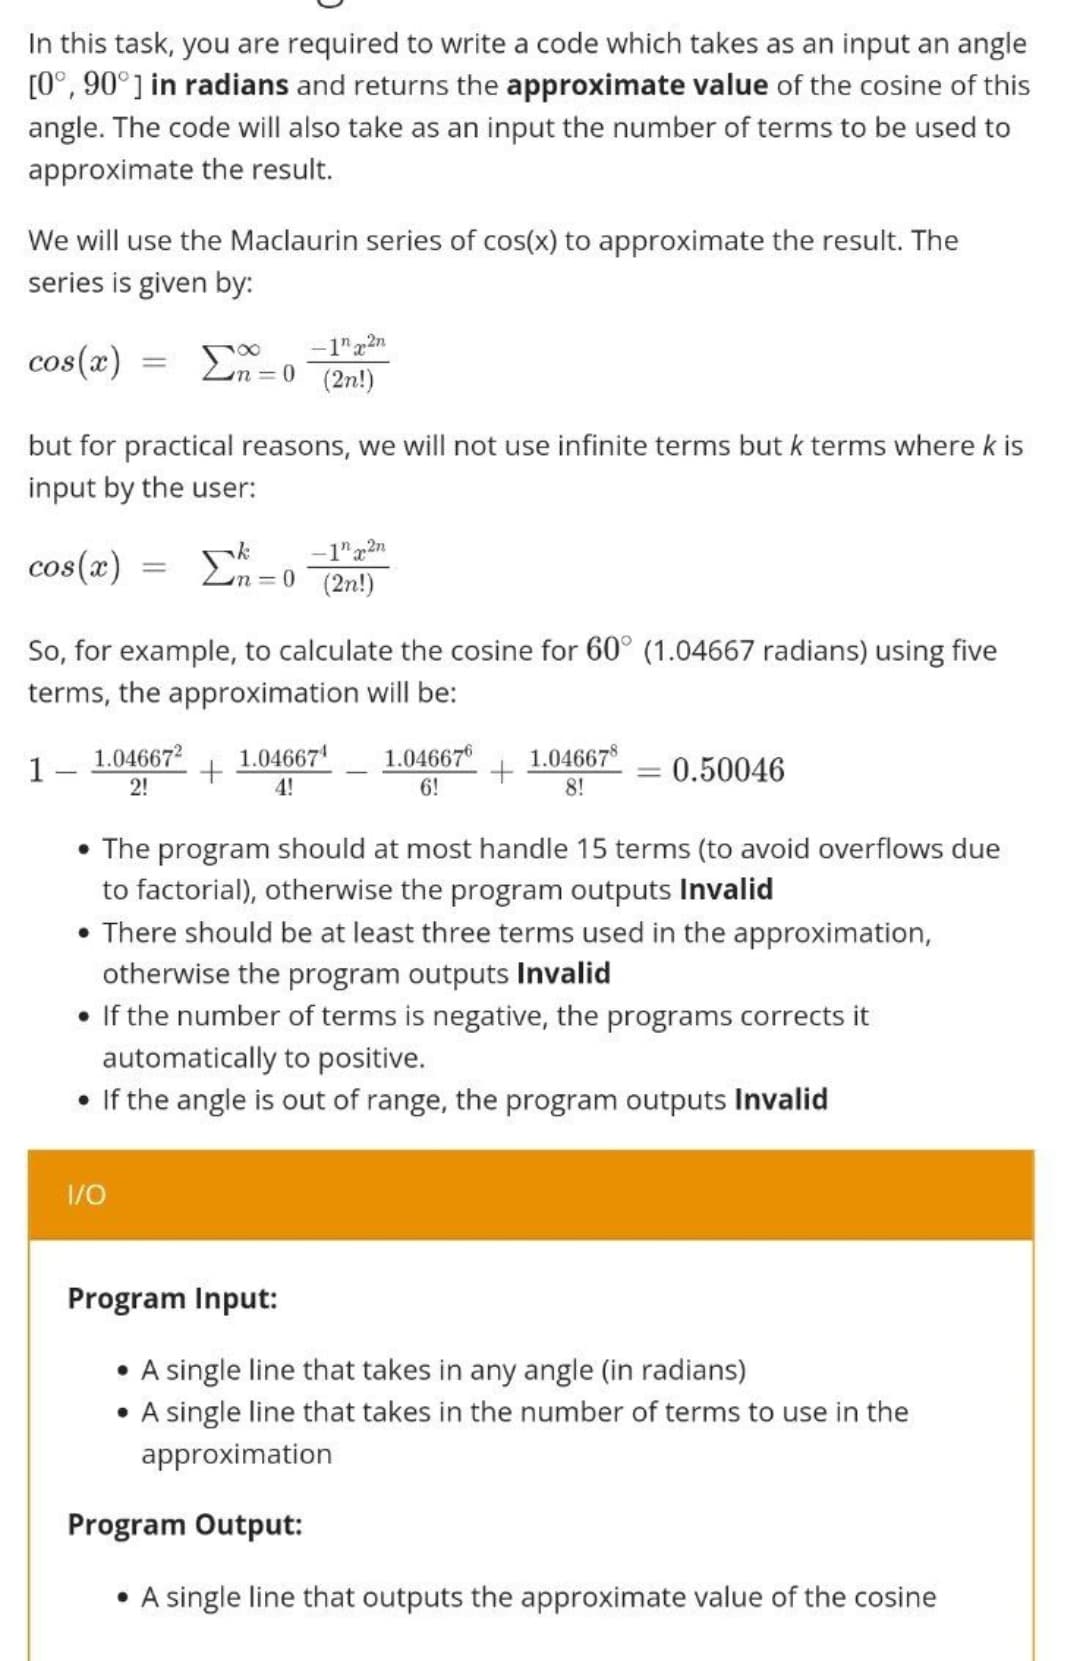 In this task, you are required to write a code which takes as an input an angle
[0°, 90°] in radians and returns the approximate value of the cosine of this
angle. The code will also take as an input the number of terms to be used to
approximate the result.
We will use the Maclaurin series of cos(x) to approximate the result. The
series is given by:
cos(x)
=
Σn=0
-1"x2n
(2n!)
but for practical reasons, we will not use infinite terms but k terms where k is
input by the user:
cos(x)
=
Σ
-1x2n
2n=0 (2n!)
So, for example, to calculate the cosine for 60° (1.04667 radians) using five
terms, the approximation will be:
1.04667²
1
1.04667¹
4!
1.046676 1.046678
+
0.50046
2!
6!
8!
• The program should at most handle 15 terms (to avoid overflows due
to factorial), otherwise the program outputs Invalid
• There should be at least three terms used in the approximation,
otherwise the program outputs Invalid
• If the number of terms is negative, the programs corrects it
automatically to positive.
• If the angle is out of range, the program outputs Invalid
1/0
Program Input:
A single line that takes in any angle (in radians)
• A single line that takes in the number of terms to use in the
approximation
Program Output:
• A single line that outputs the approximate value of the cosine